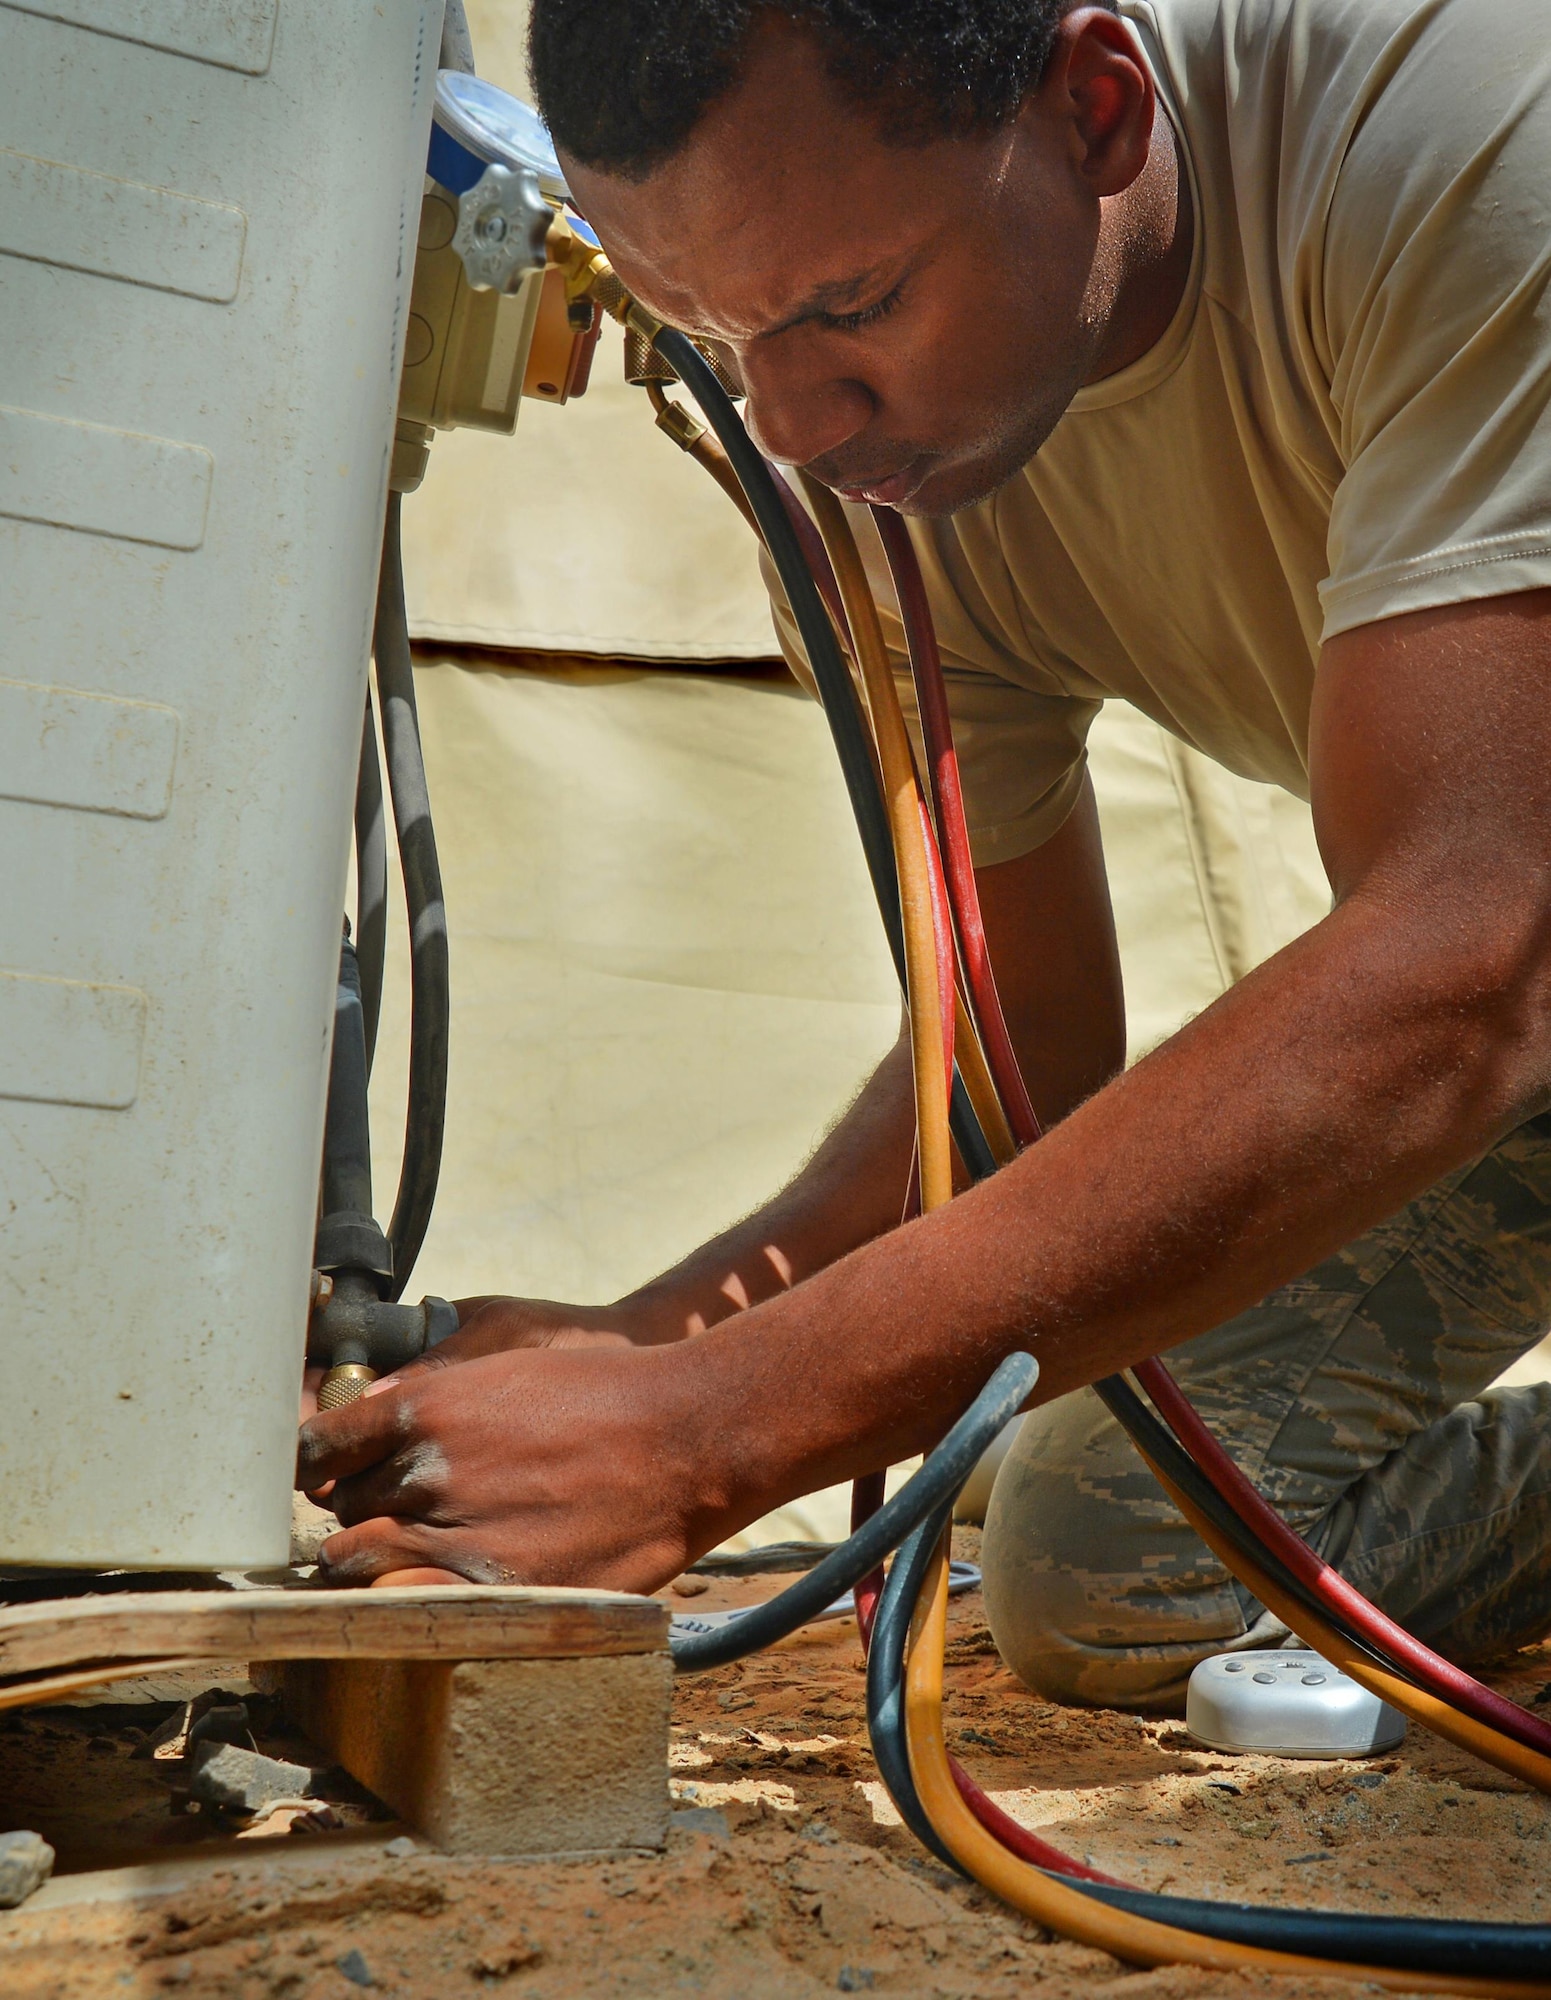 Senior Airman Dorian, heating, ventilation and air conditioning journeyman, prepares an AC unit for relocation at an undisclosed location in Southwest Asia May 7, 2015. HVAC Airmen are responsible for installing, operating, maintaining, and repairing heating, ventilation, air conditioning and refrigeration systems, combustion equipment, and industrial air compressors. (U.S. Air Force photo/Tech. Sgt. Jeff Andrejcik)